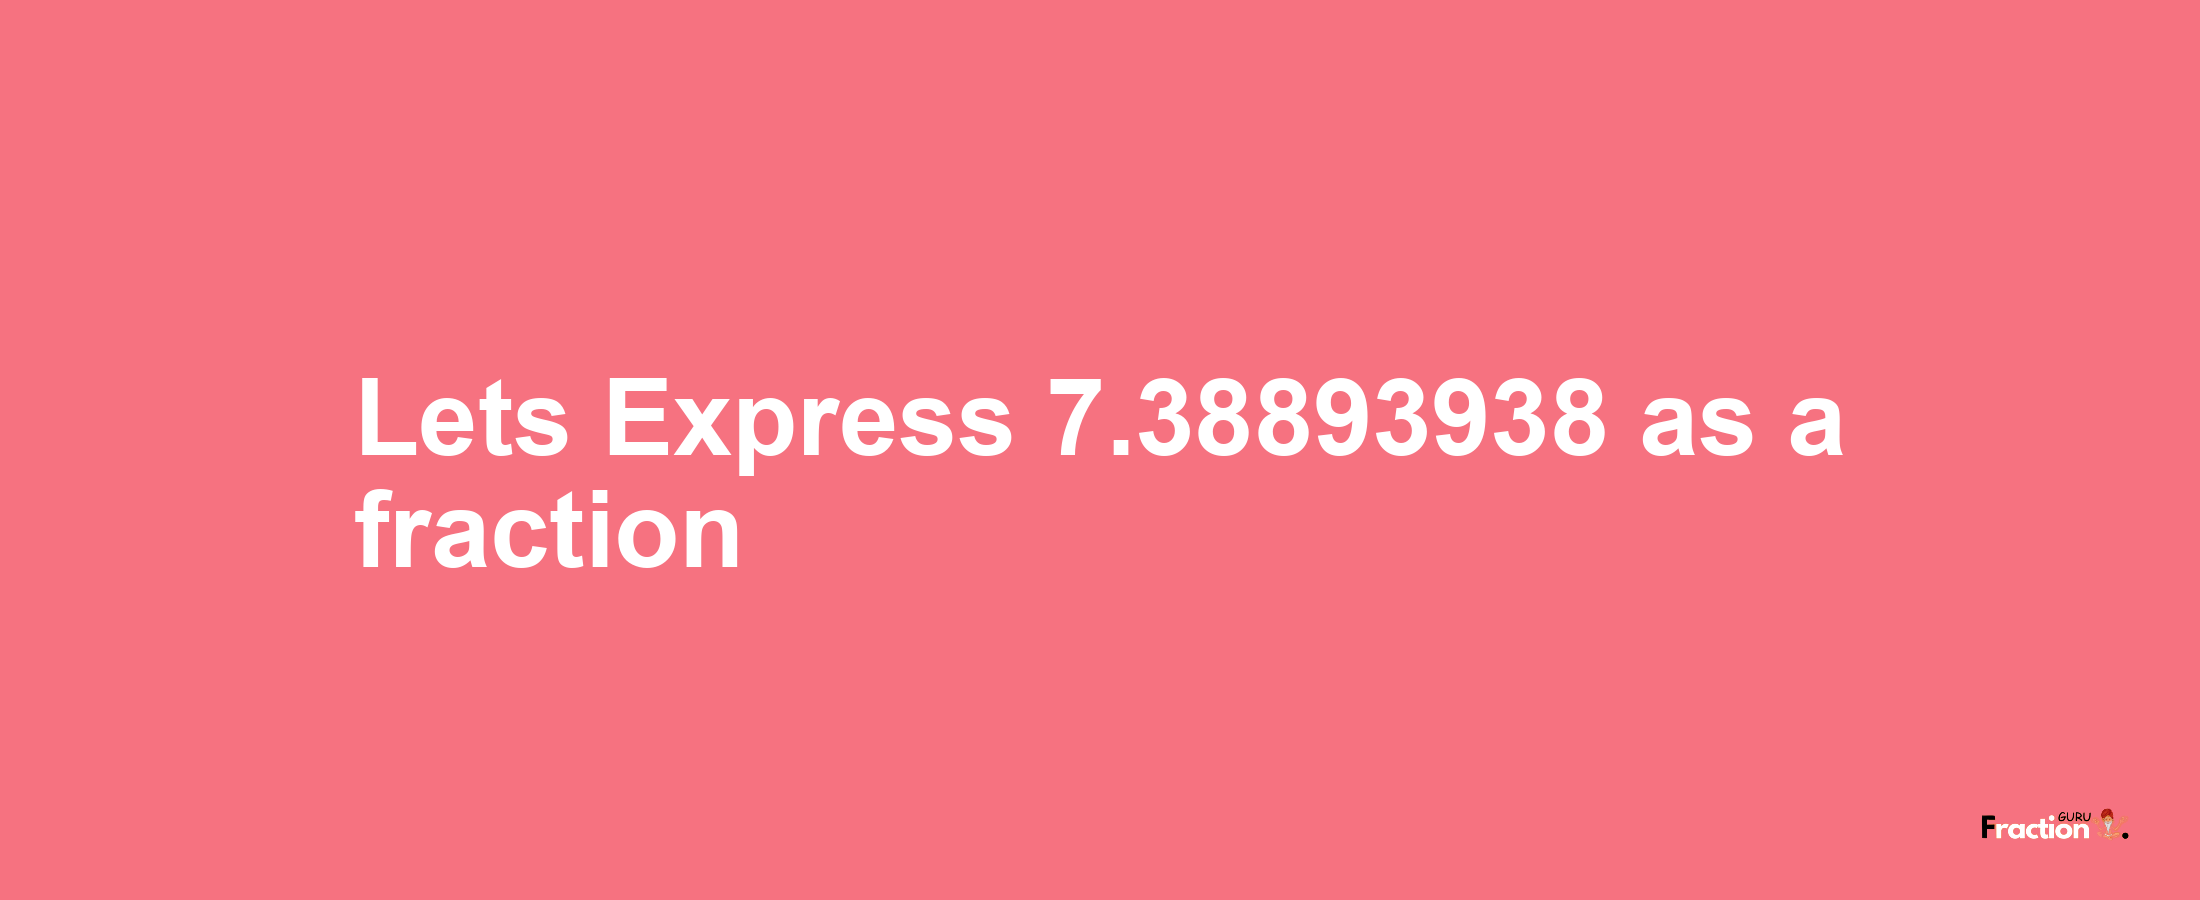 Lets Express 7.38893938 as afraction